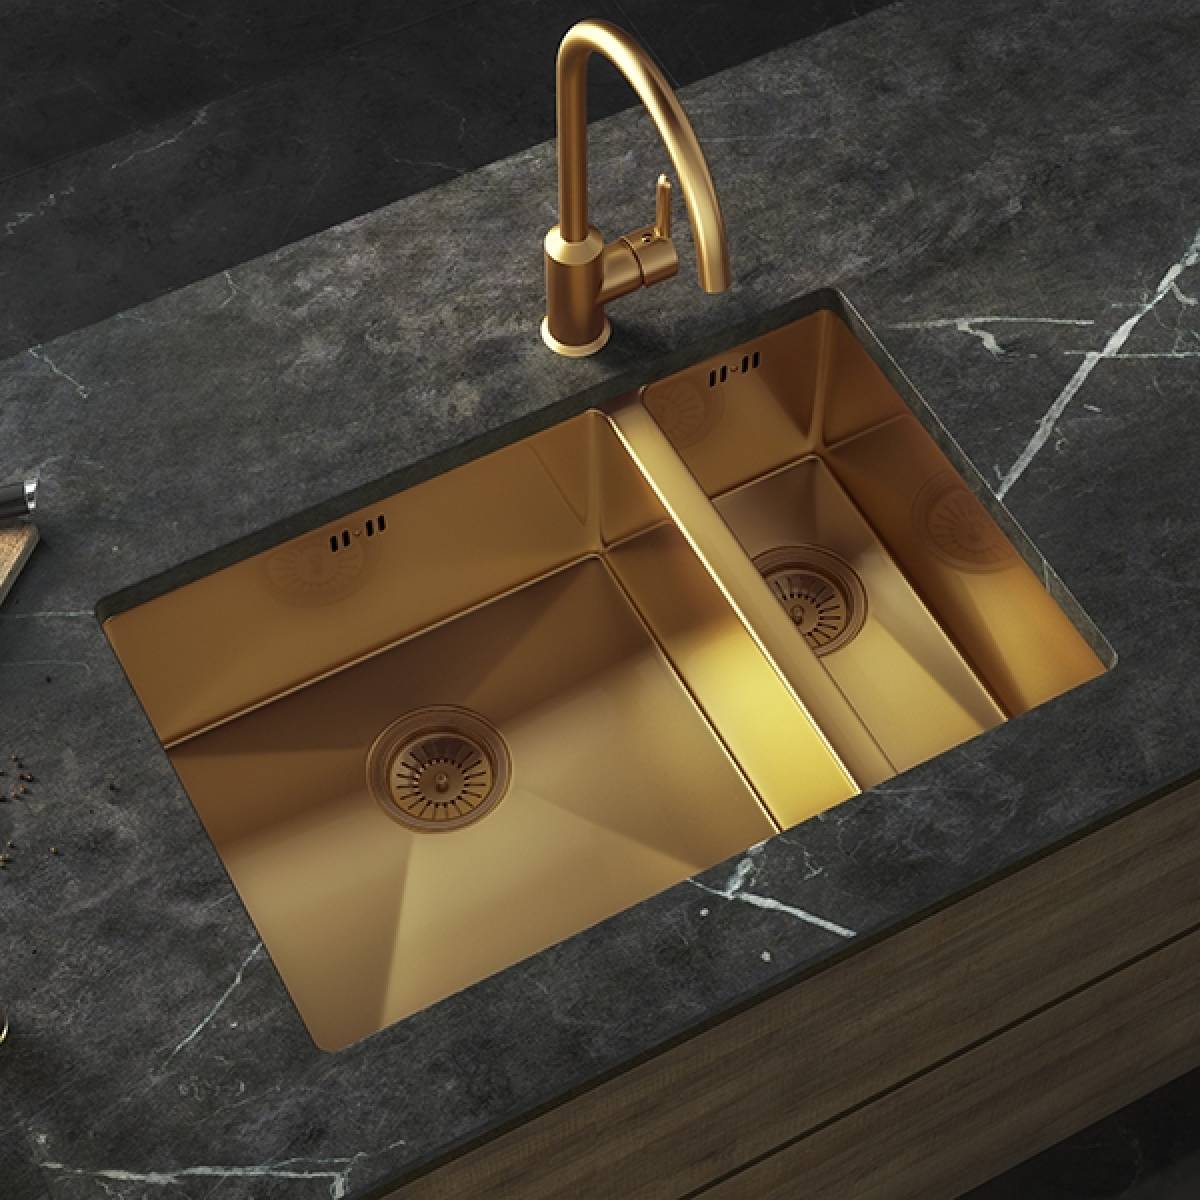 Elite 1.5 Bowl Inset or Undermounted Stainless Steel Kitchen Sink & Waste - Gold Finish (19017)